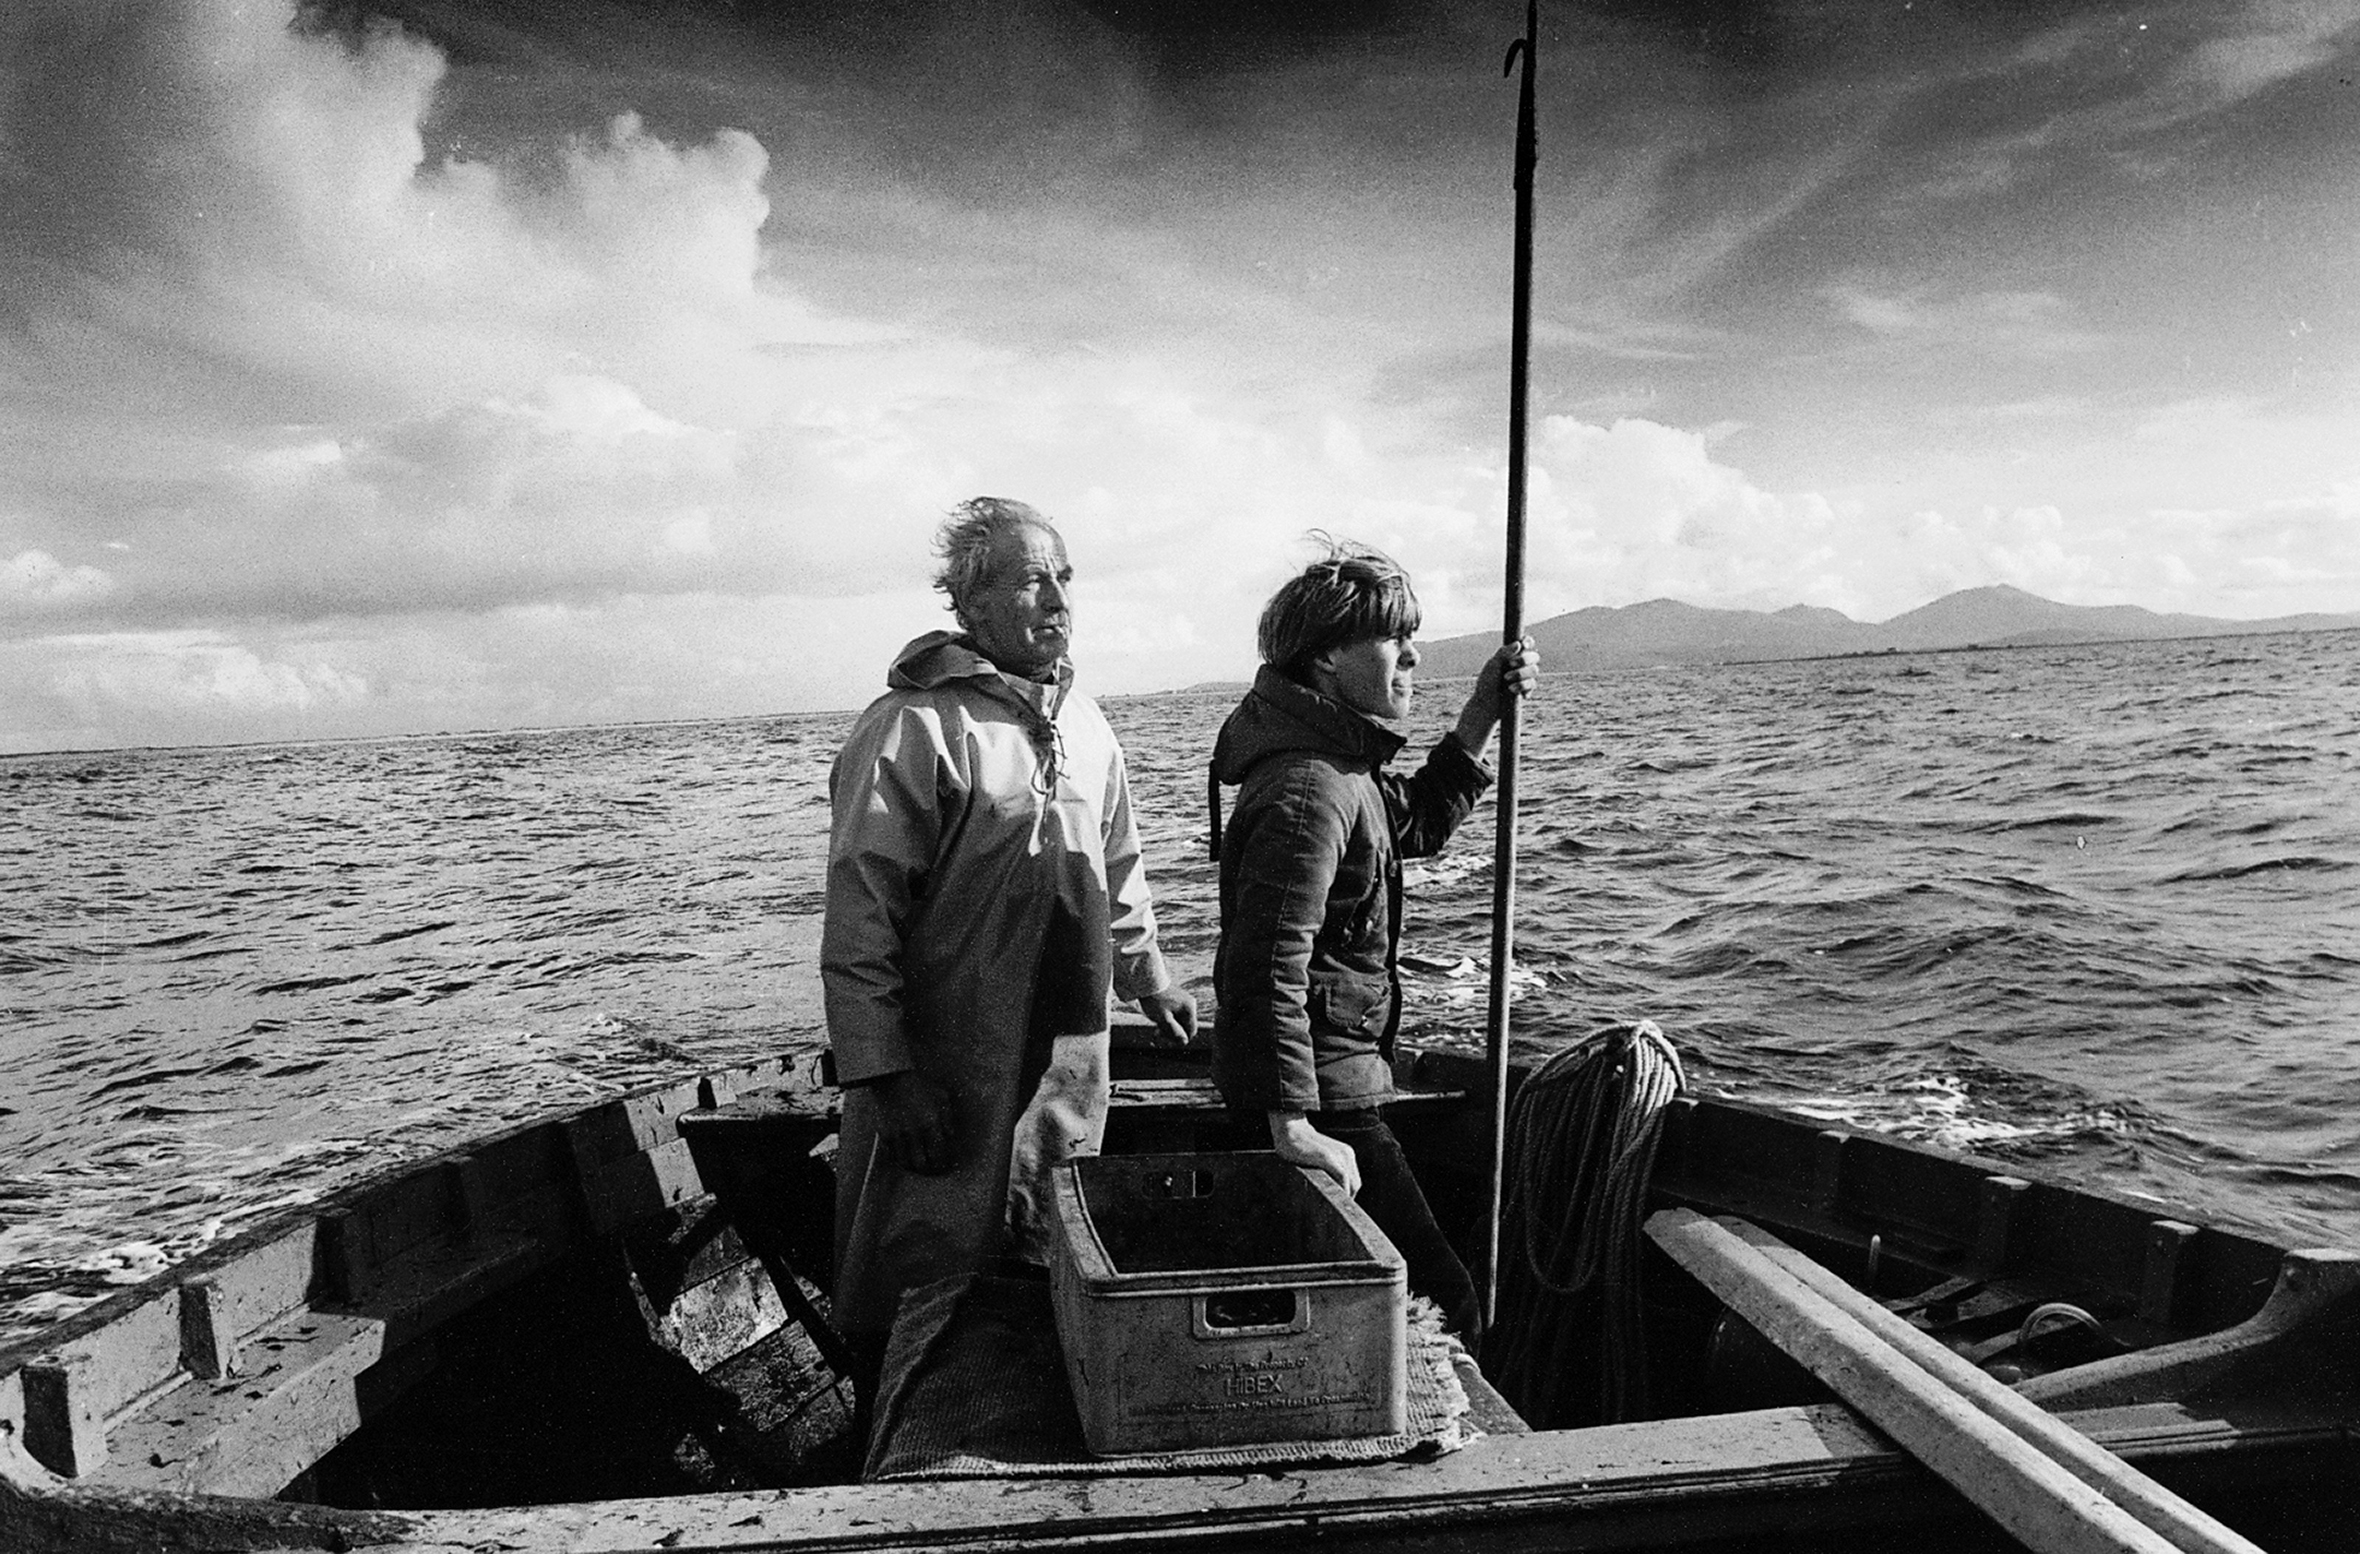 An old man and a young man both in profile looking off to the right in a nondescript boat off the Outer Hebrides, Scotland, on a choppy sea on a cold, cloudy day. The young man is holding a long-handled harpoon pointed up in his left hand.